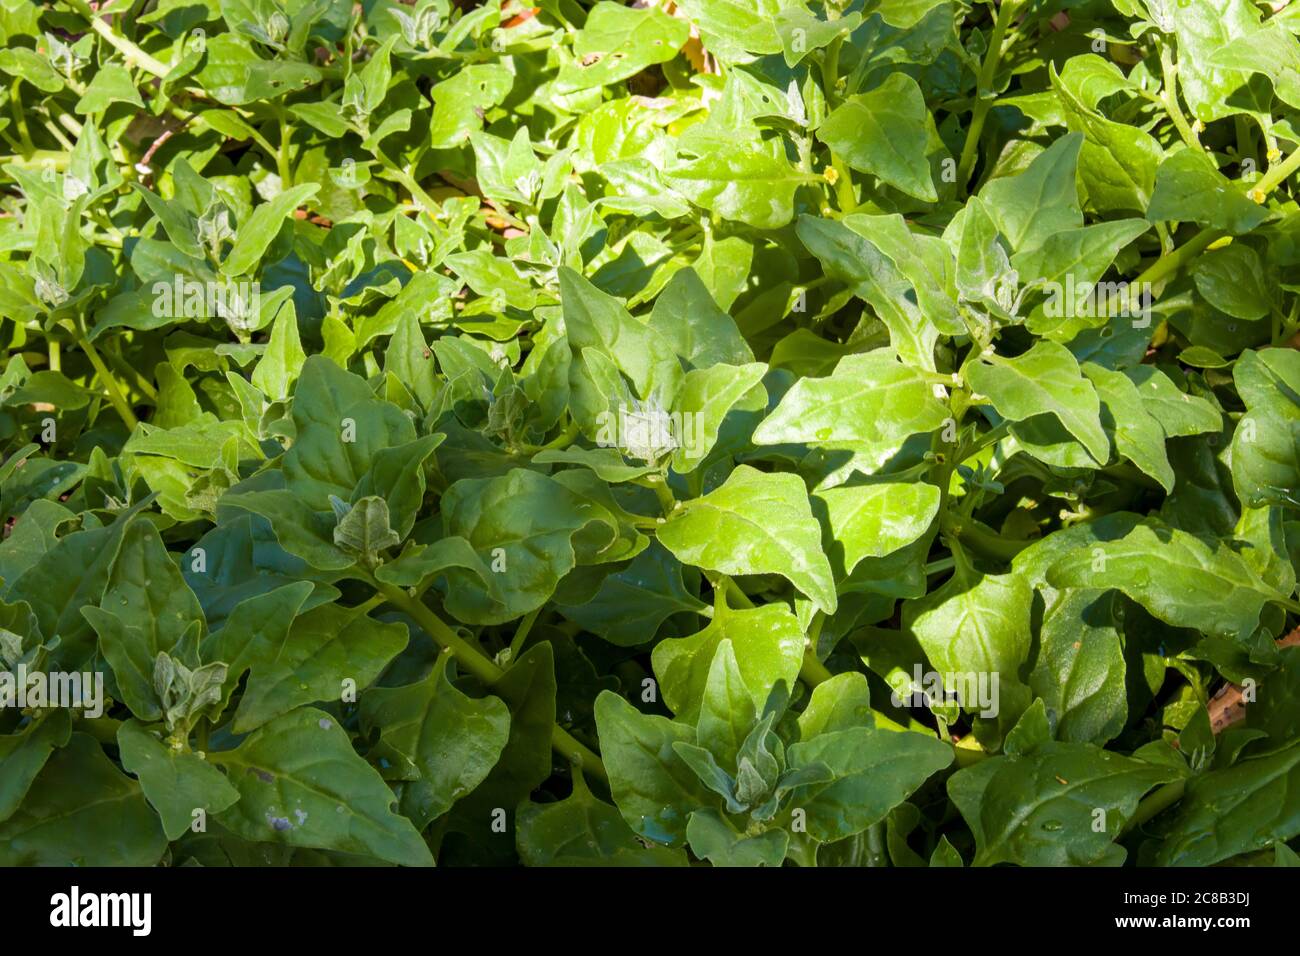 Tetragonia tetragonioides, commonly called New Zealand spinach. Stock Photo